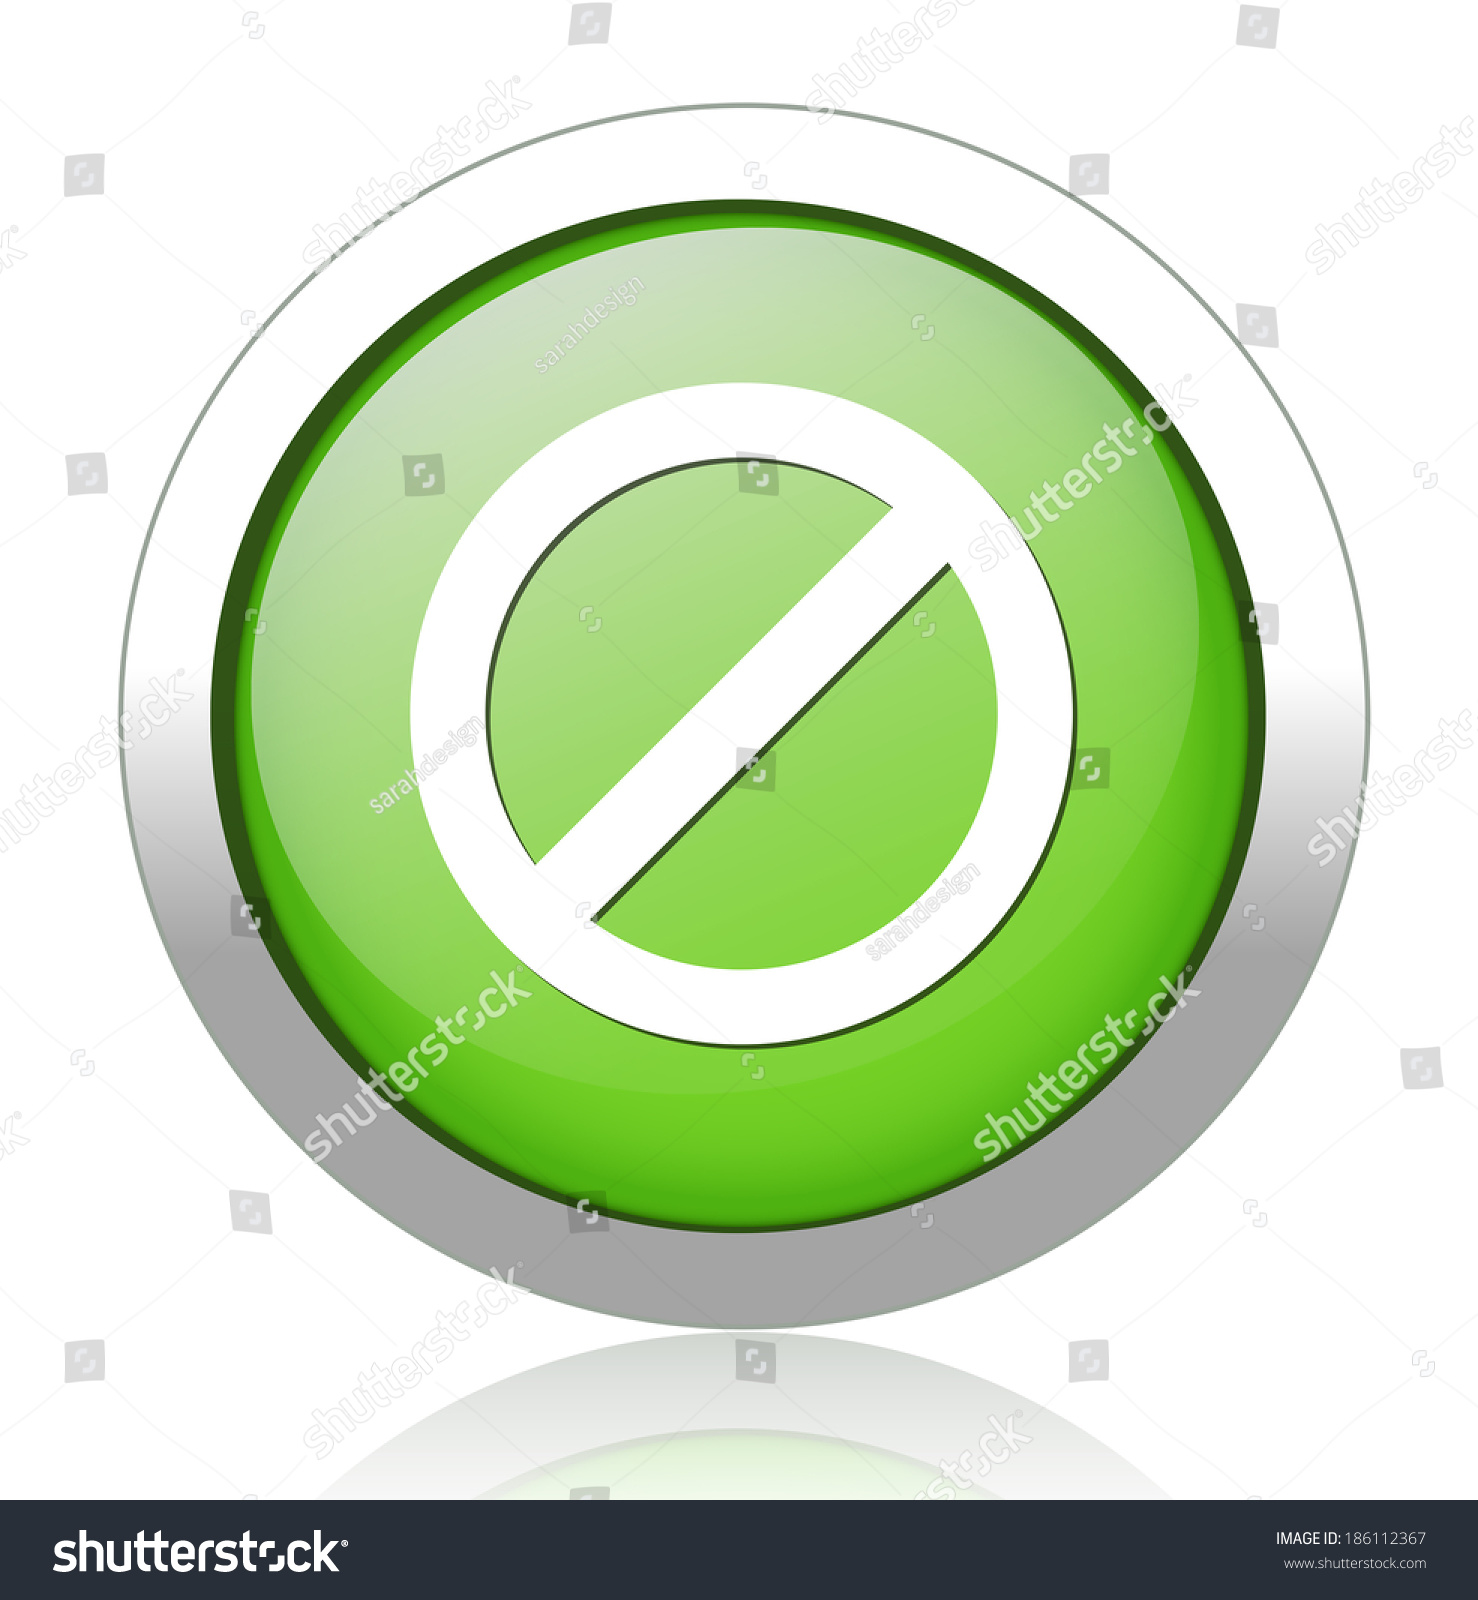 not-allowed-sign-vector-stock-vector-royalty-free-186112367-shutterstock